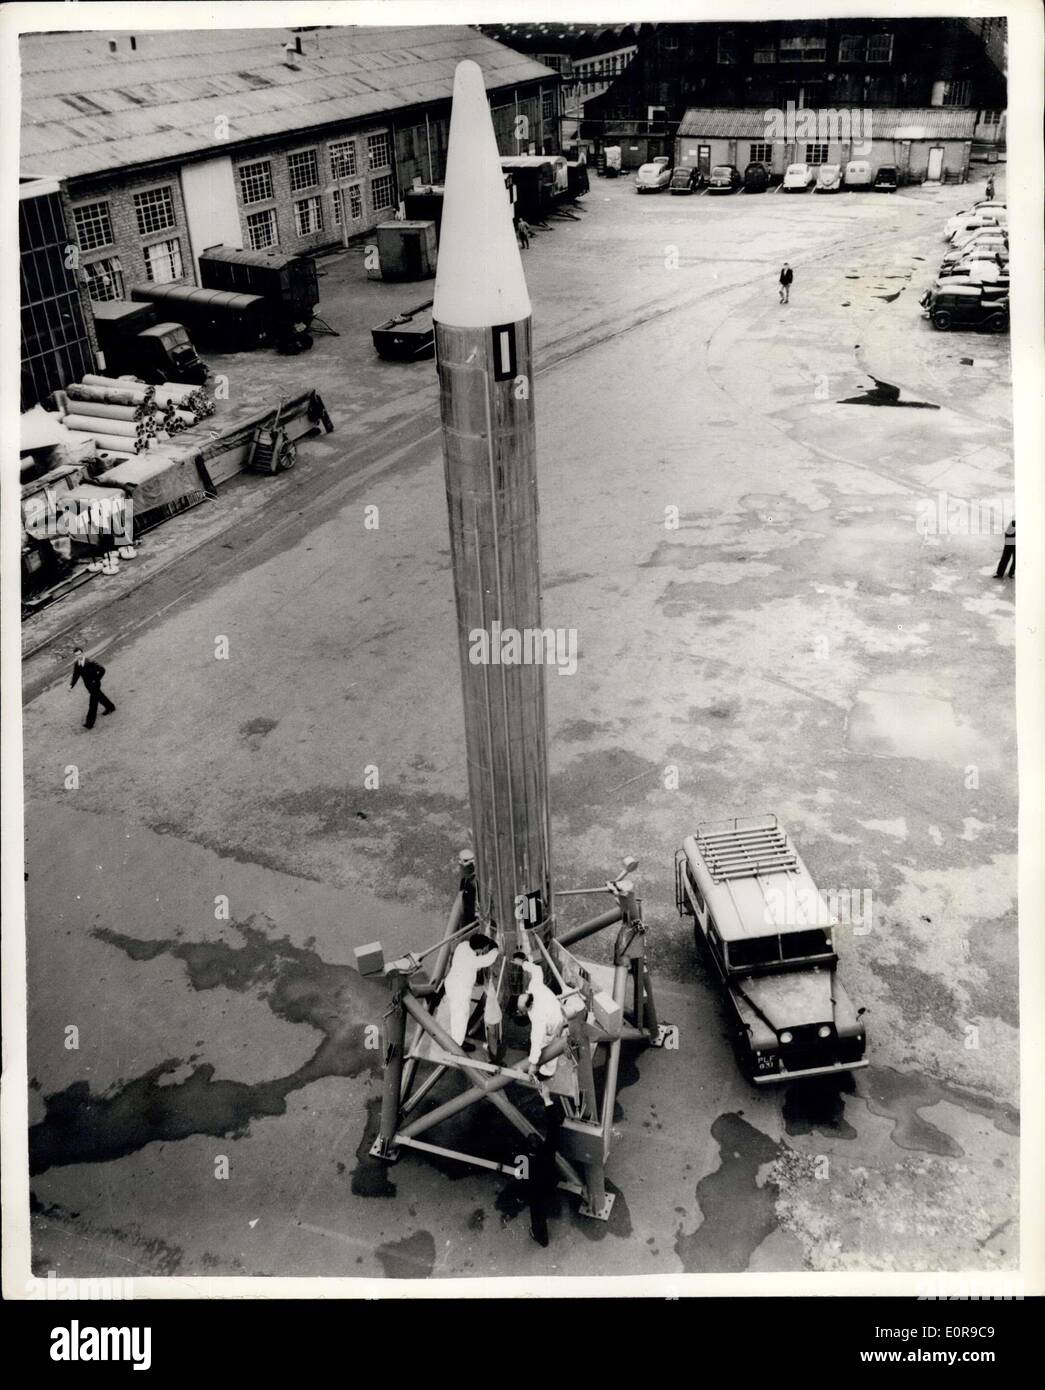 Sep. 07, 1958 - 7.9.58 Black Knight Test Flight - A Test Flight of a ballistic rocket -The Black Knight - designed for research Stock Photo